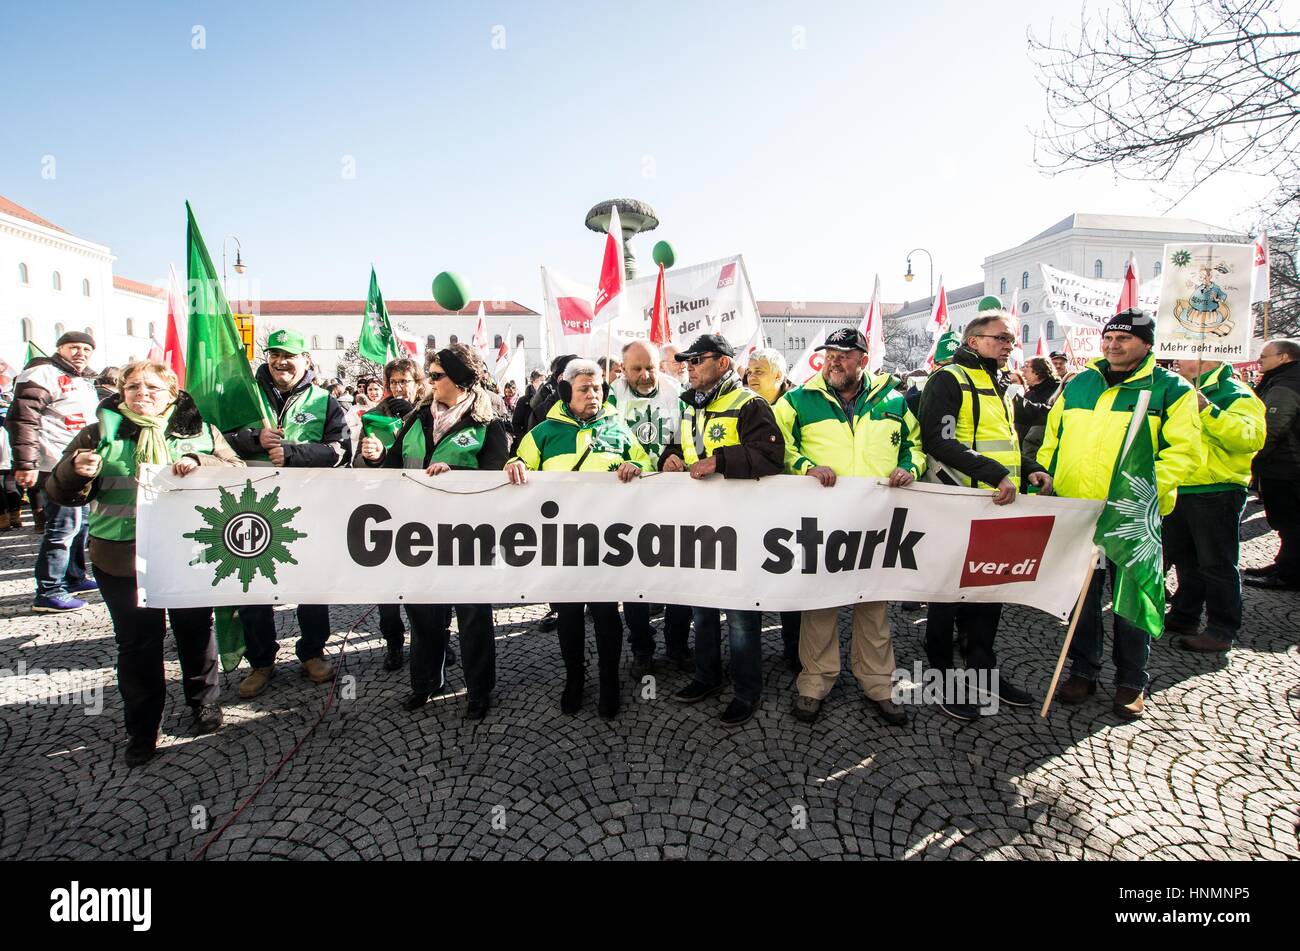 Munich, Germany. 14th Feb, 2017. The Ver.di and police unions called for a warning strike today in Munich in a series of strikes in Germany. Included in the strike are workers of the TU and LMU universities, Deutsches Museum, courts, hospitals, Bayerische Staatsoper, Bayerisches Schauspiel, and others including highway workers. The demonstration start was at the Gewerkschaftshaus on Schwanthalerstrasse and ended at the famed Geschwister-Scholl-Platz at the LMU university. Police are demanding a raise of 6% and modifications to the training structures. Credit: ZUMA Press, Inc./Alamy Live News Stock Photo